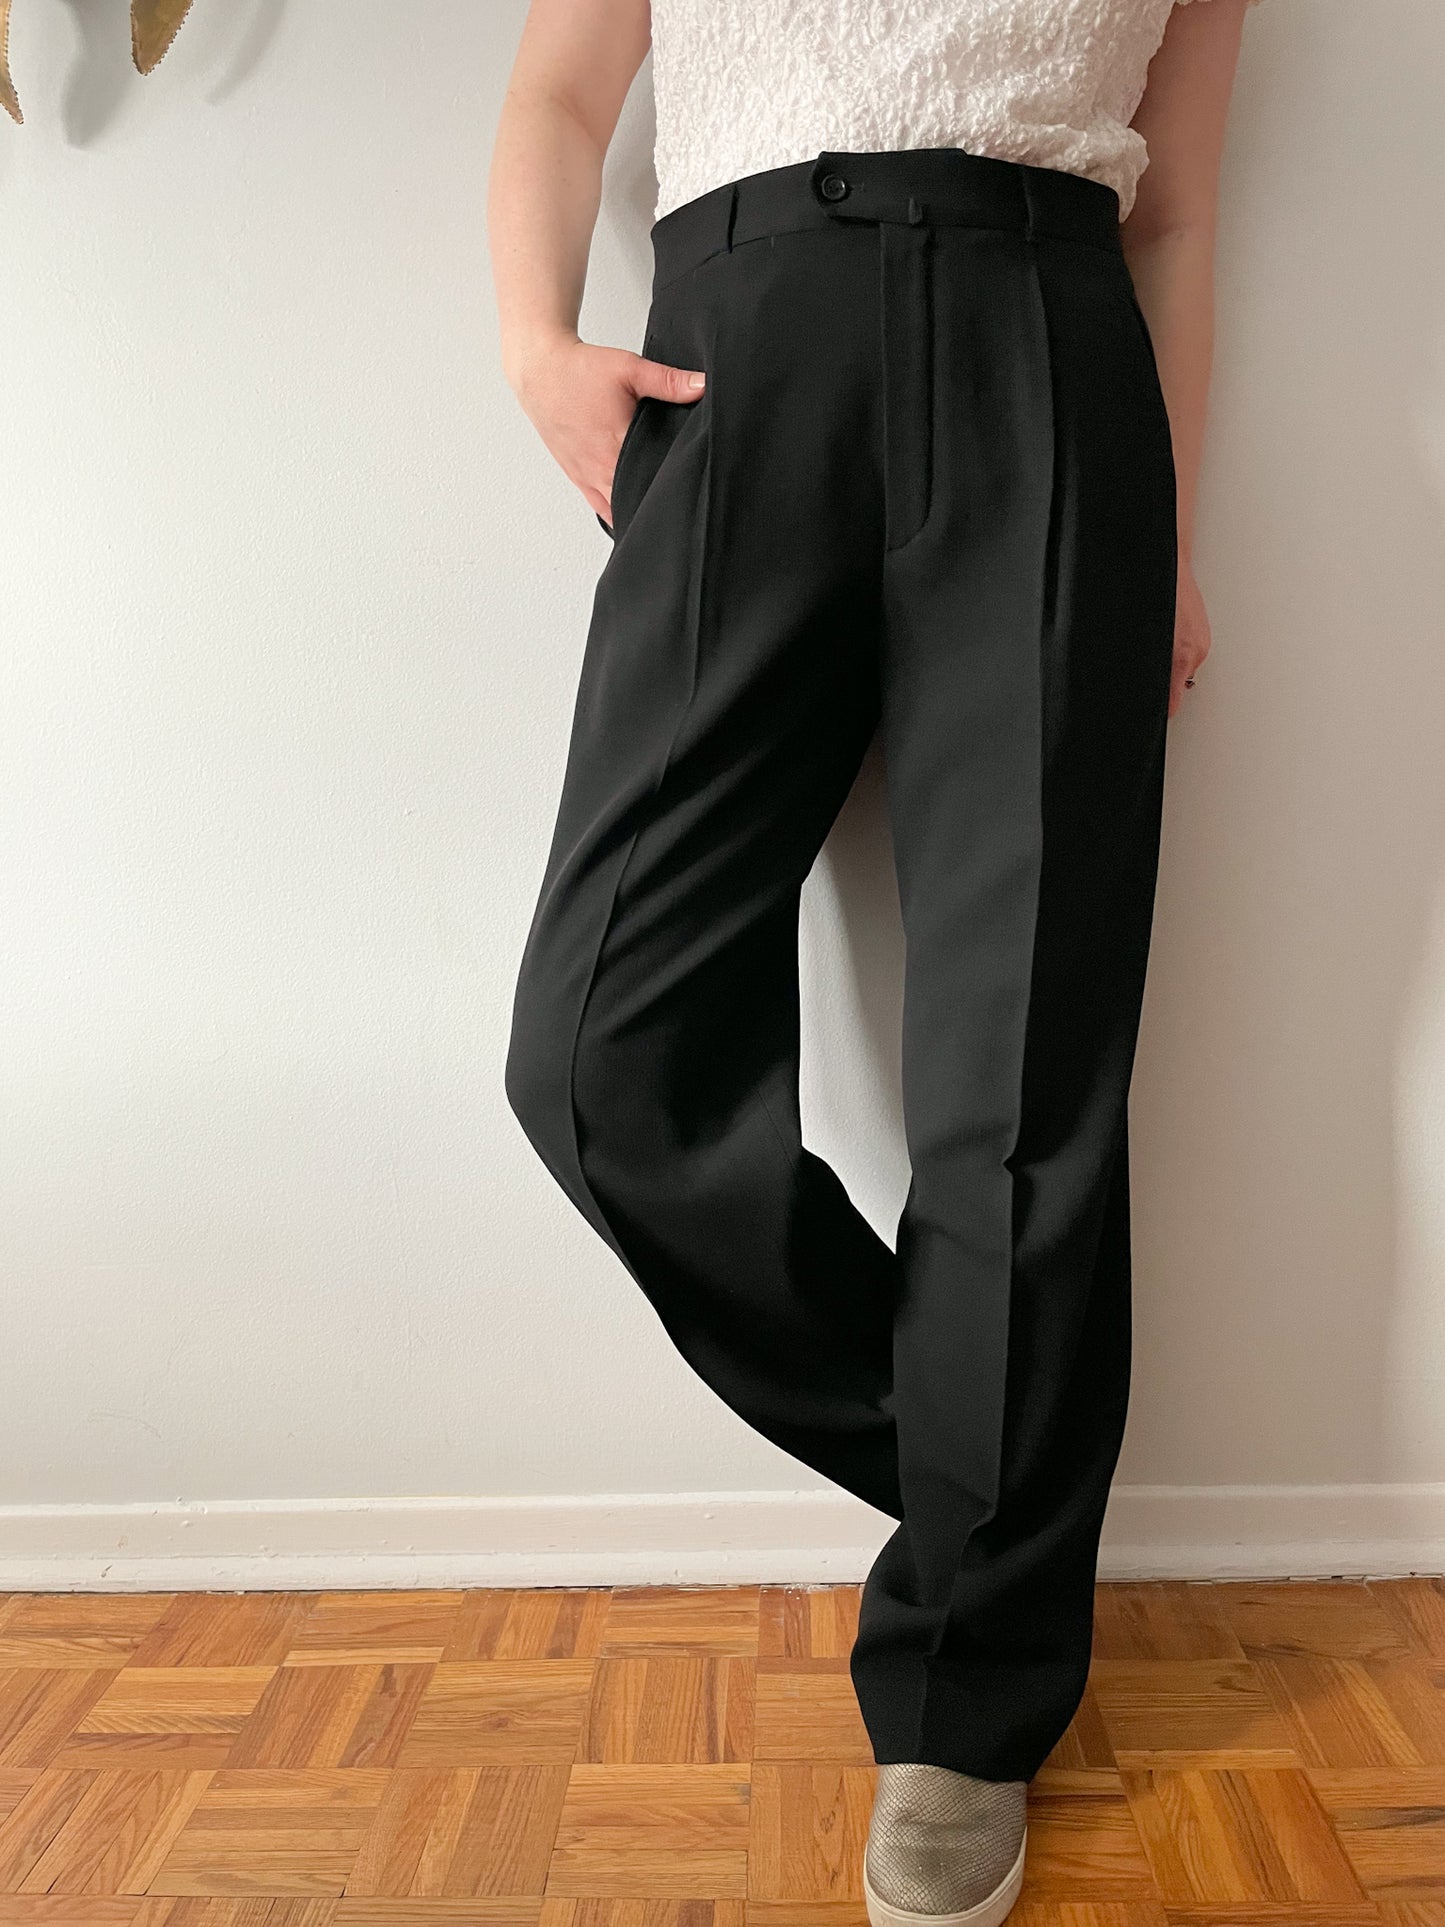 Caramelo Black High Rise Pleated Trouser Pants - XL